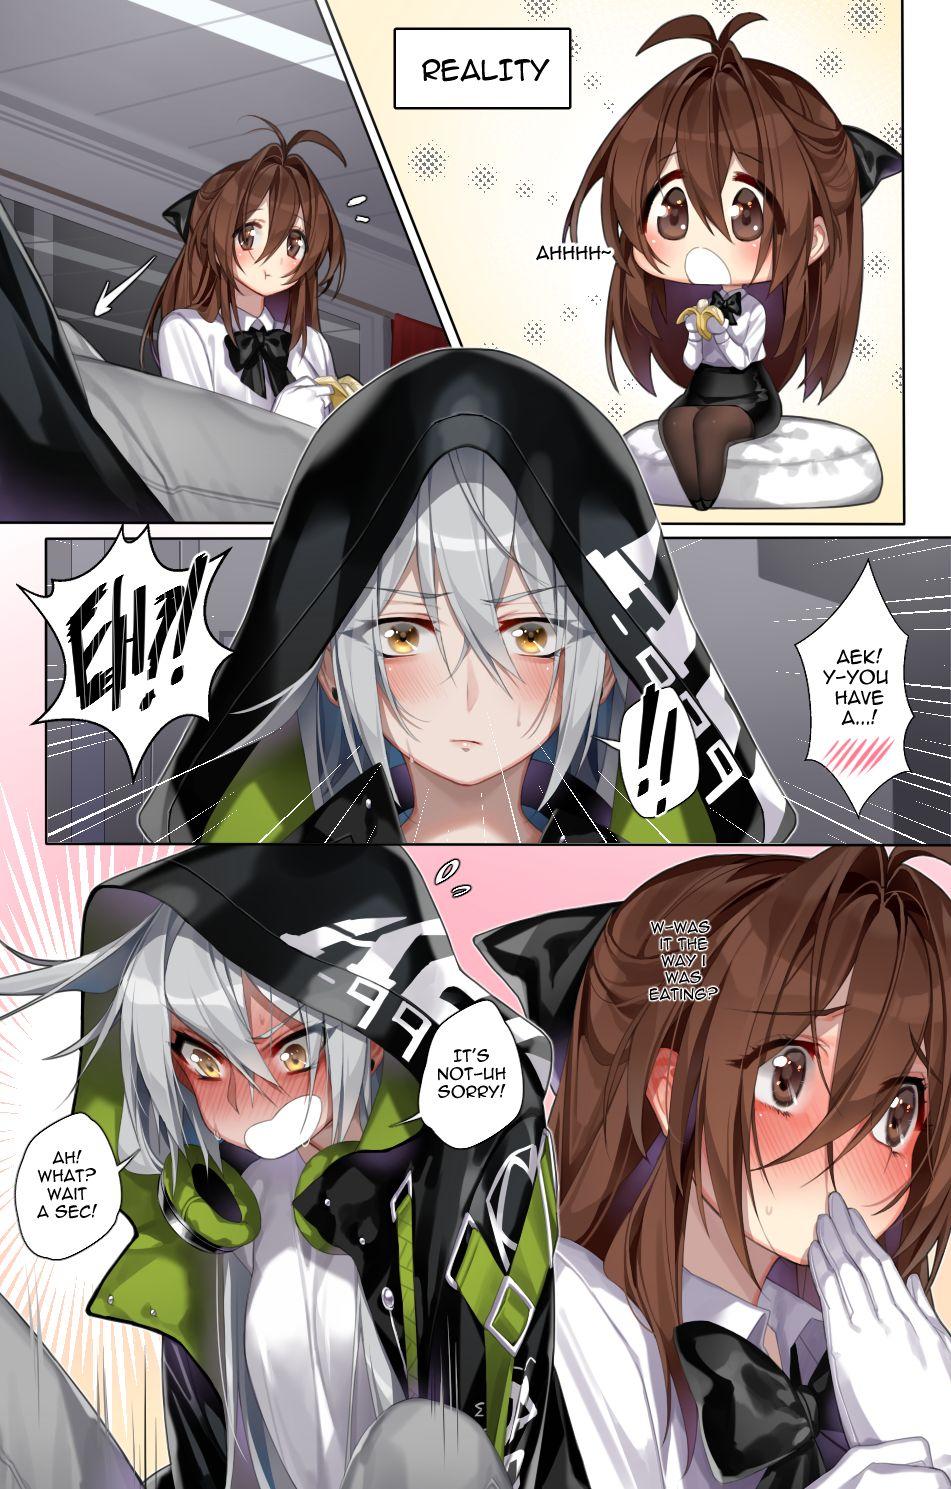 Fat Pussy AEK-999 and banana - Girls frontline Online - Page 3